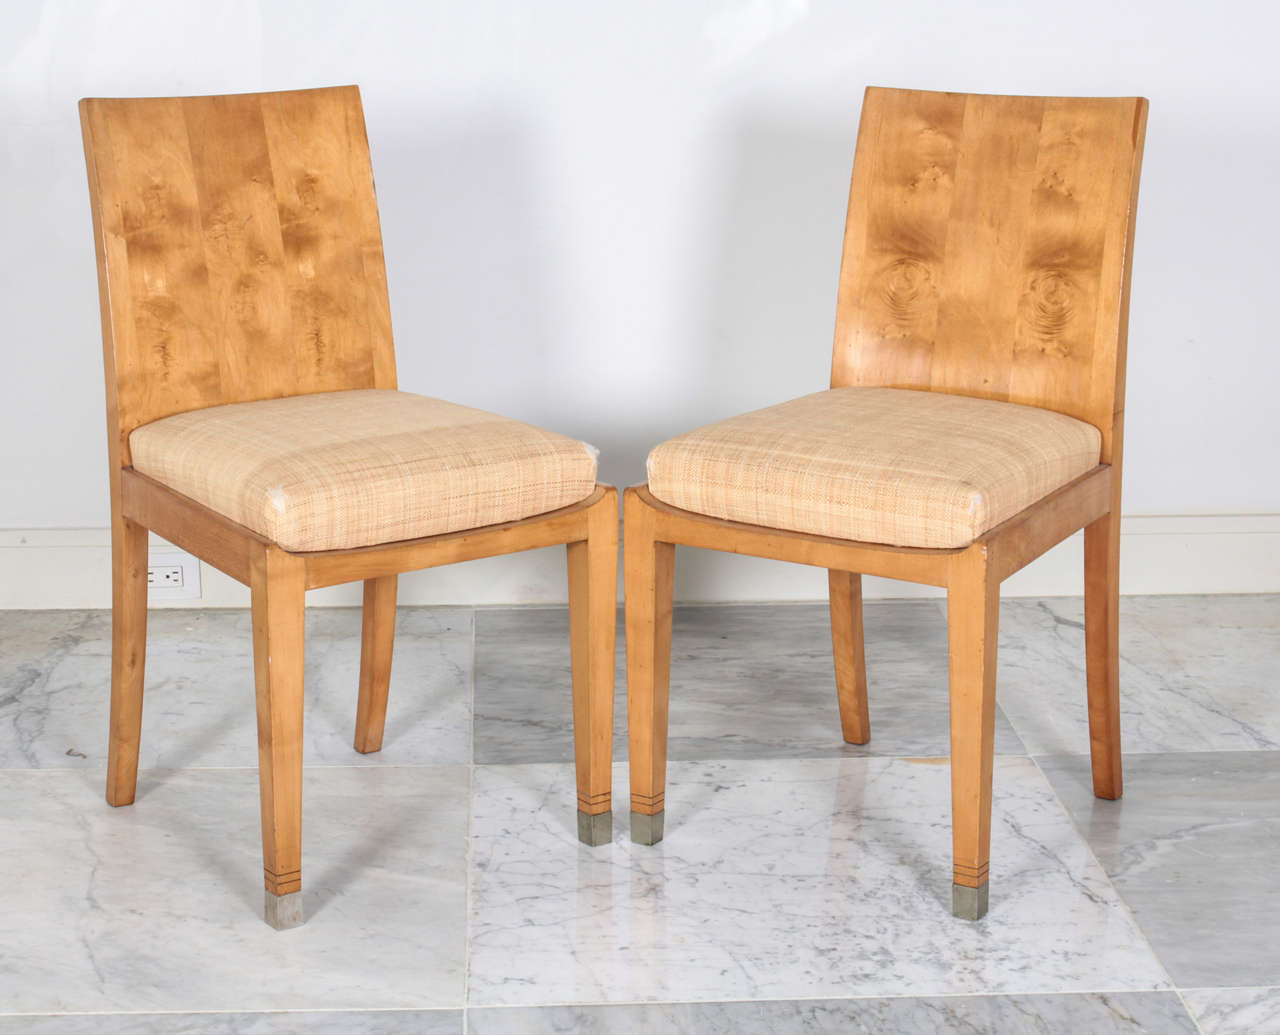 Pair of Jean-Michel Frank sycamore chairs with raffia upholstered seats. Authenticated by the Jean-Michel Frank Committee. Provenance: Hemisphere Gallery, London.